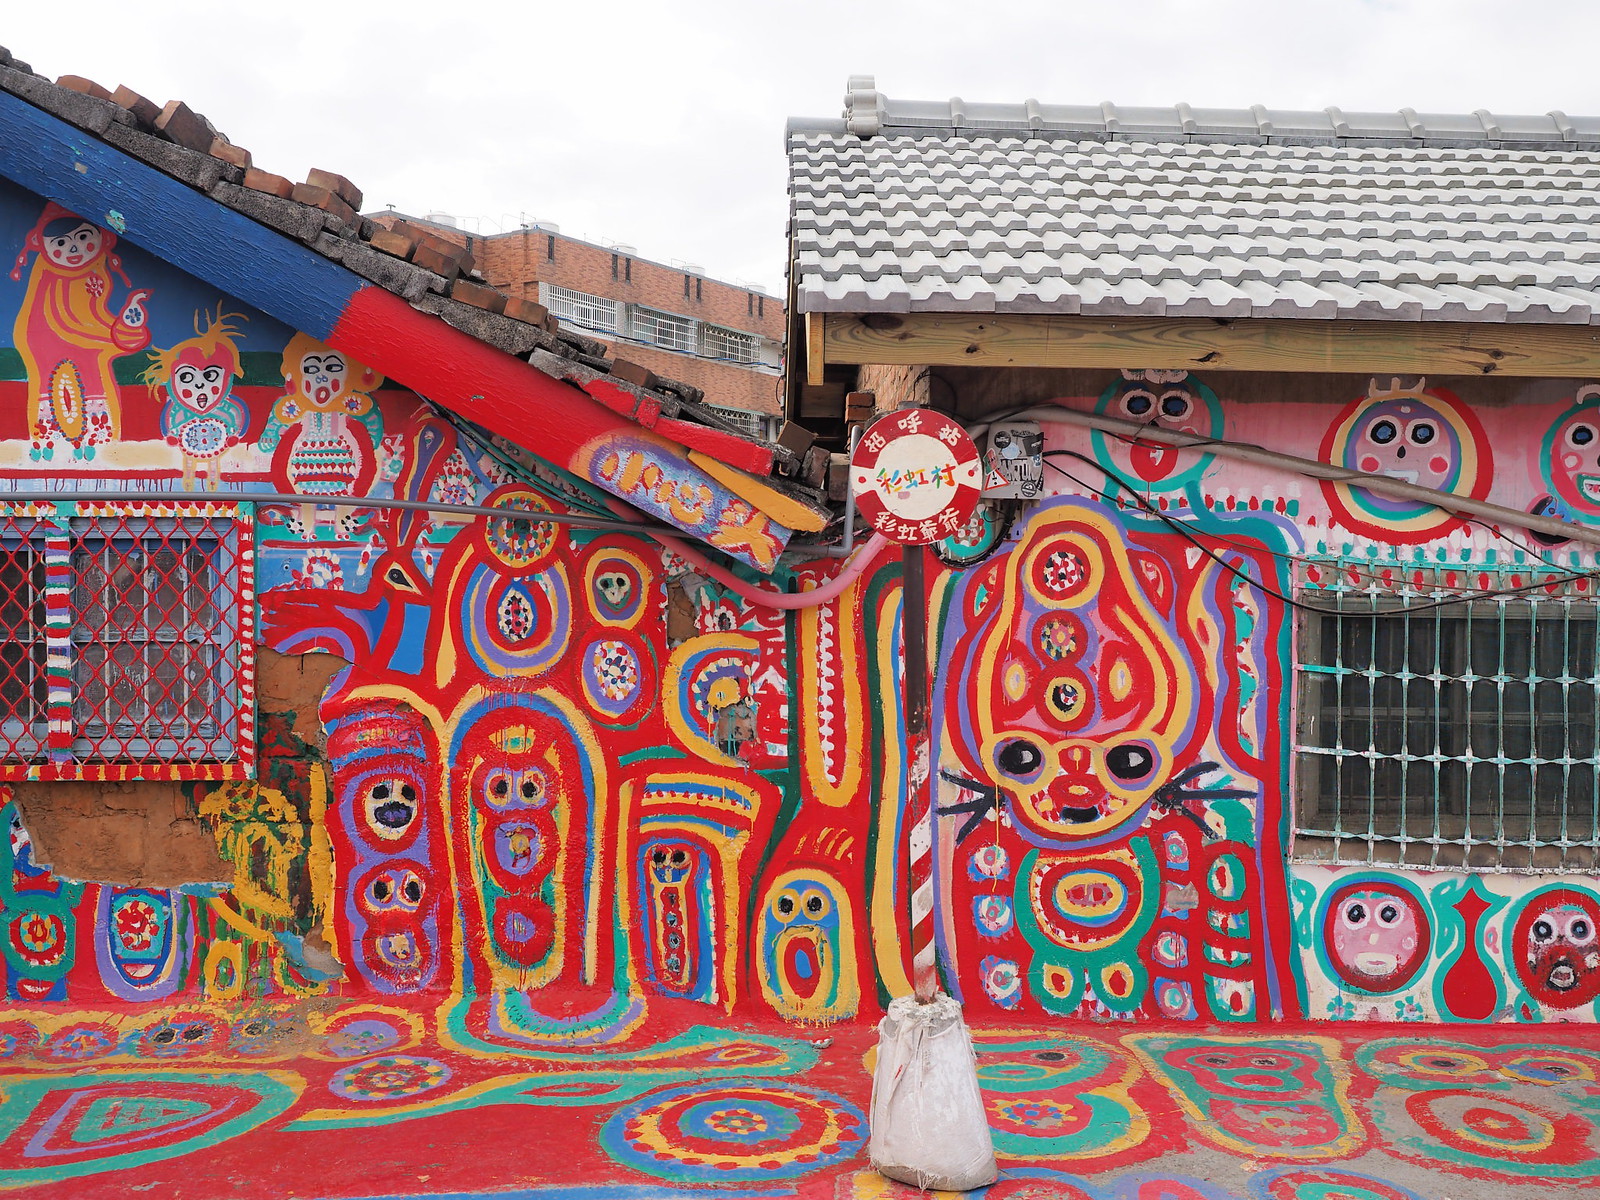 Colourful characters painted on the wall of the houses